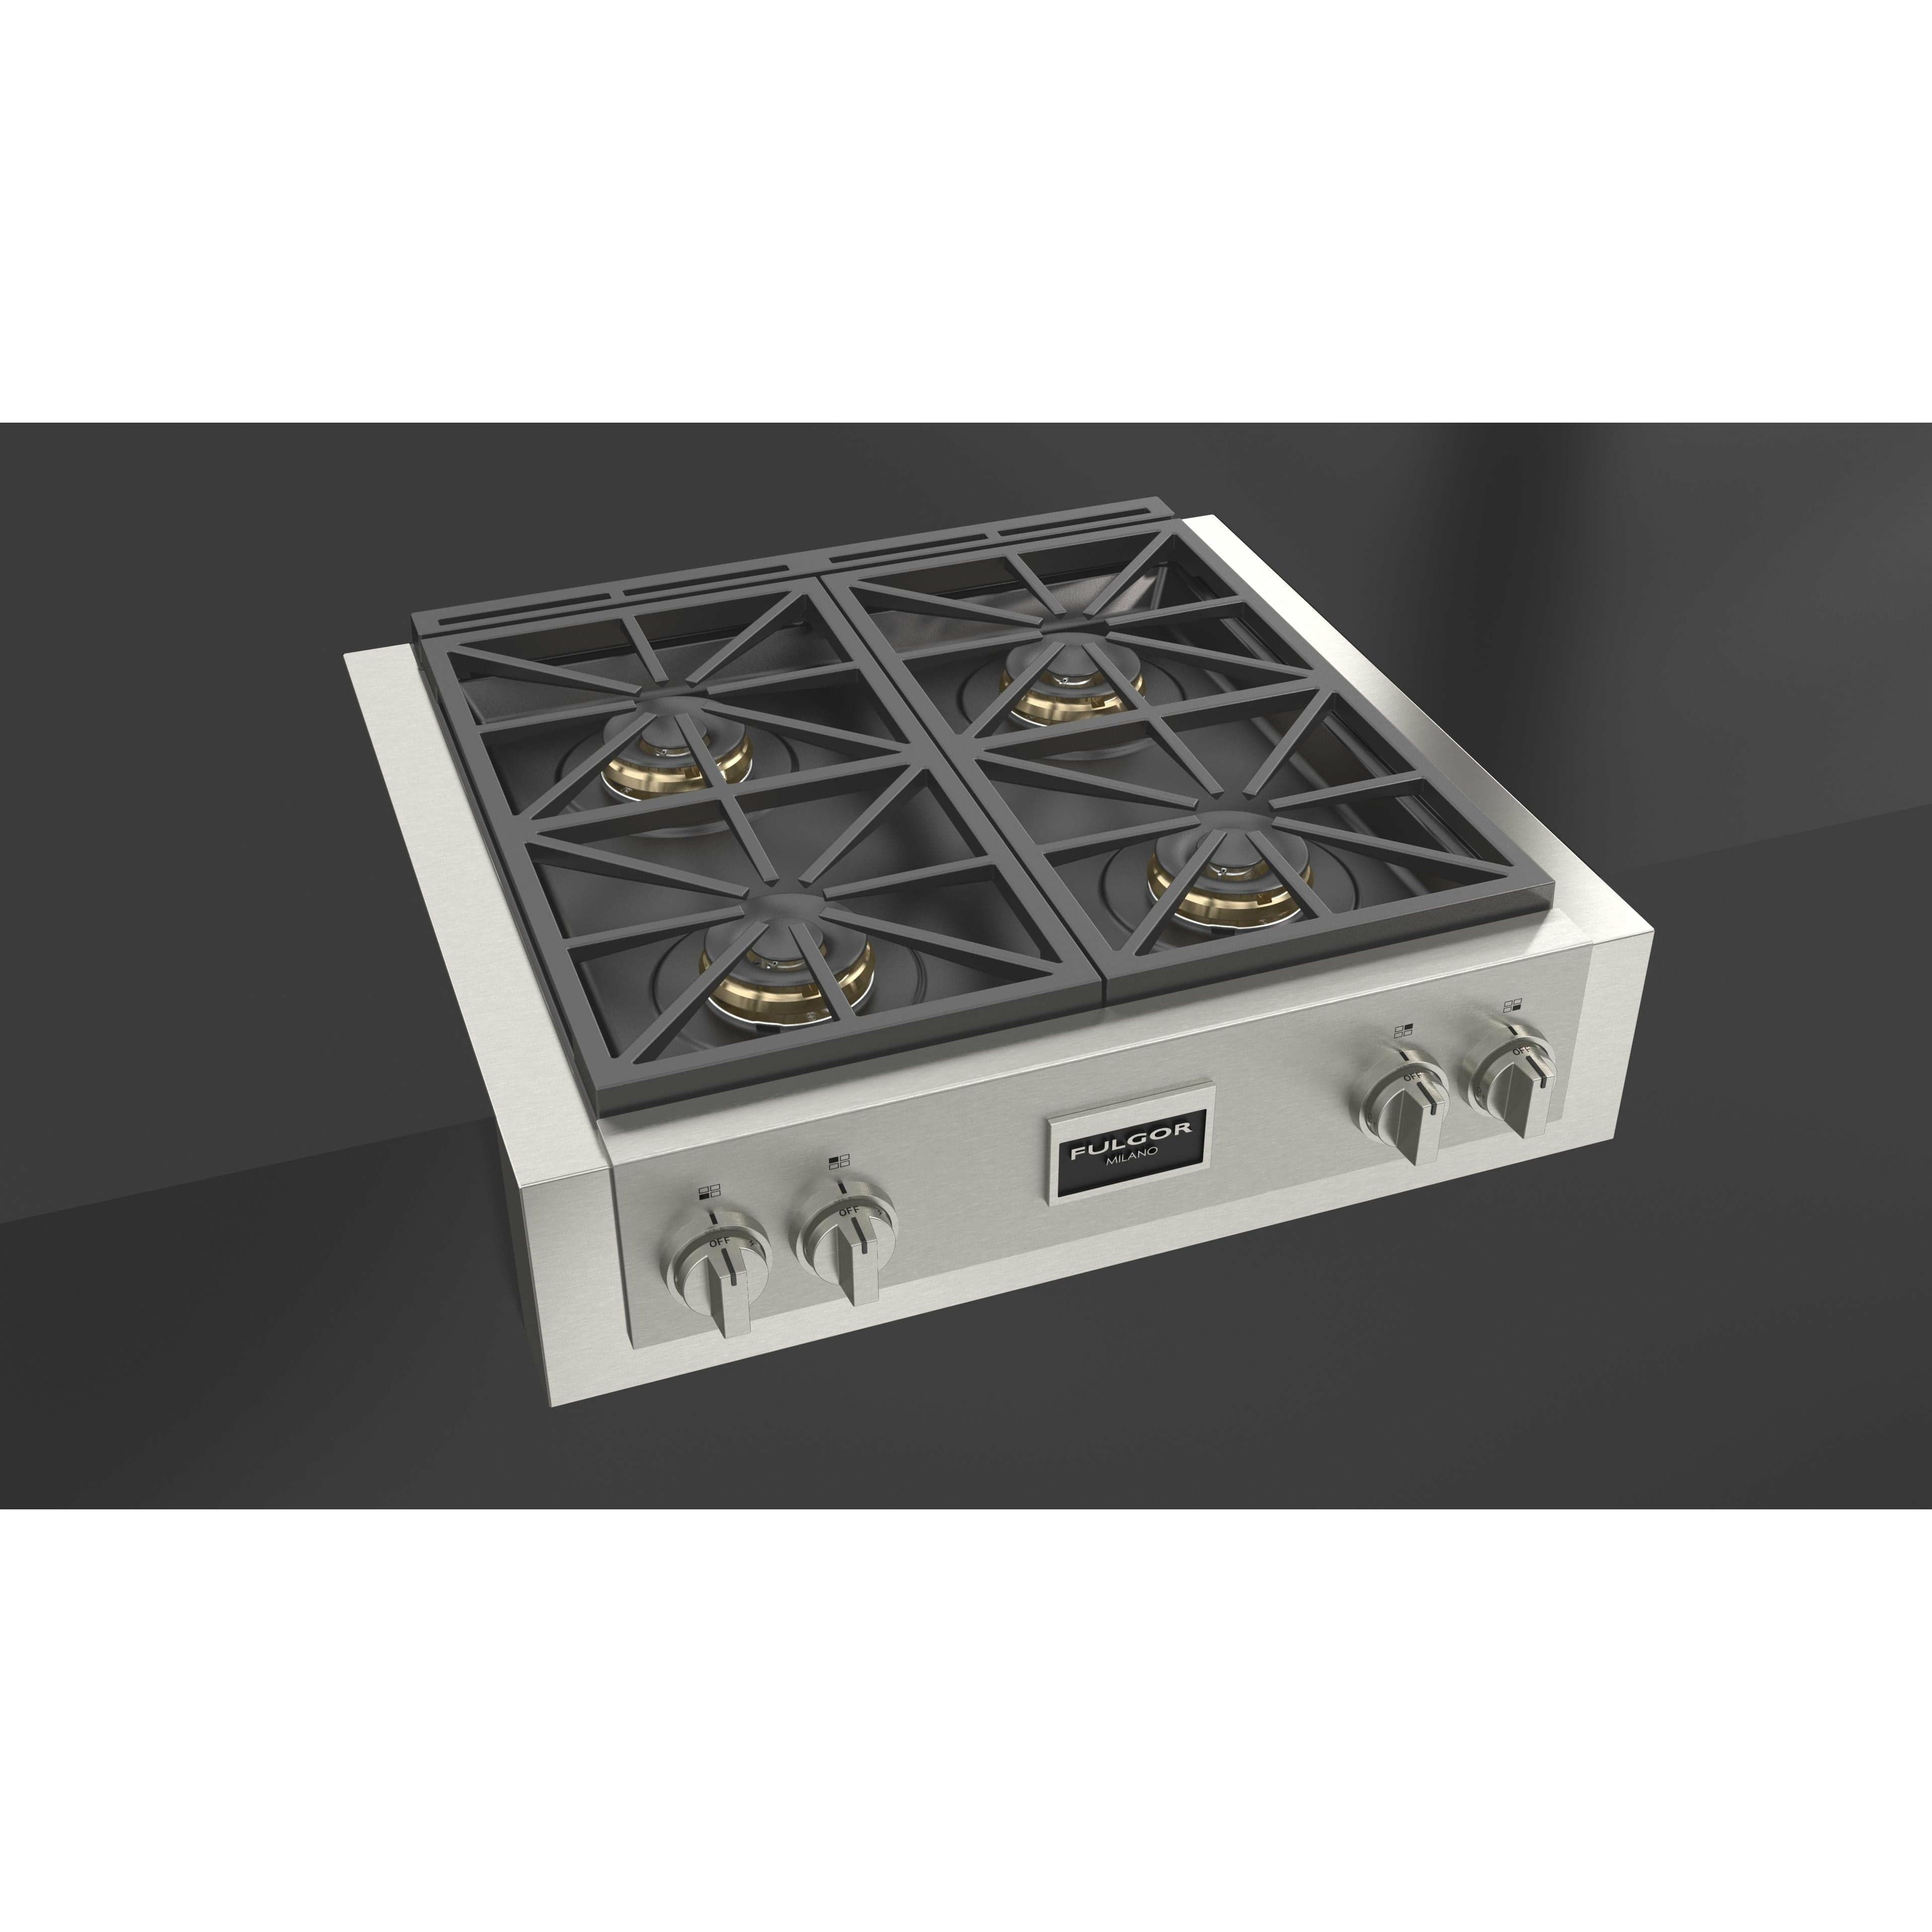 Fulgor Milano 30" Gas Rangetop with 4 Sealed Dual Flame 18,000 BTU Burners,  Stainless Steel - F6GRT304S1 Rangetop F6GRT304S1 Luxury Appliances Direct